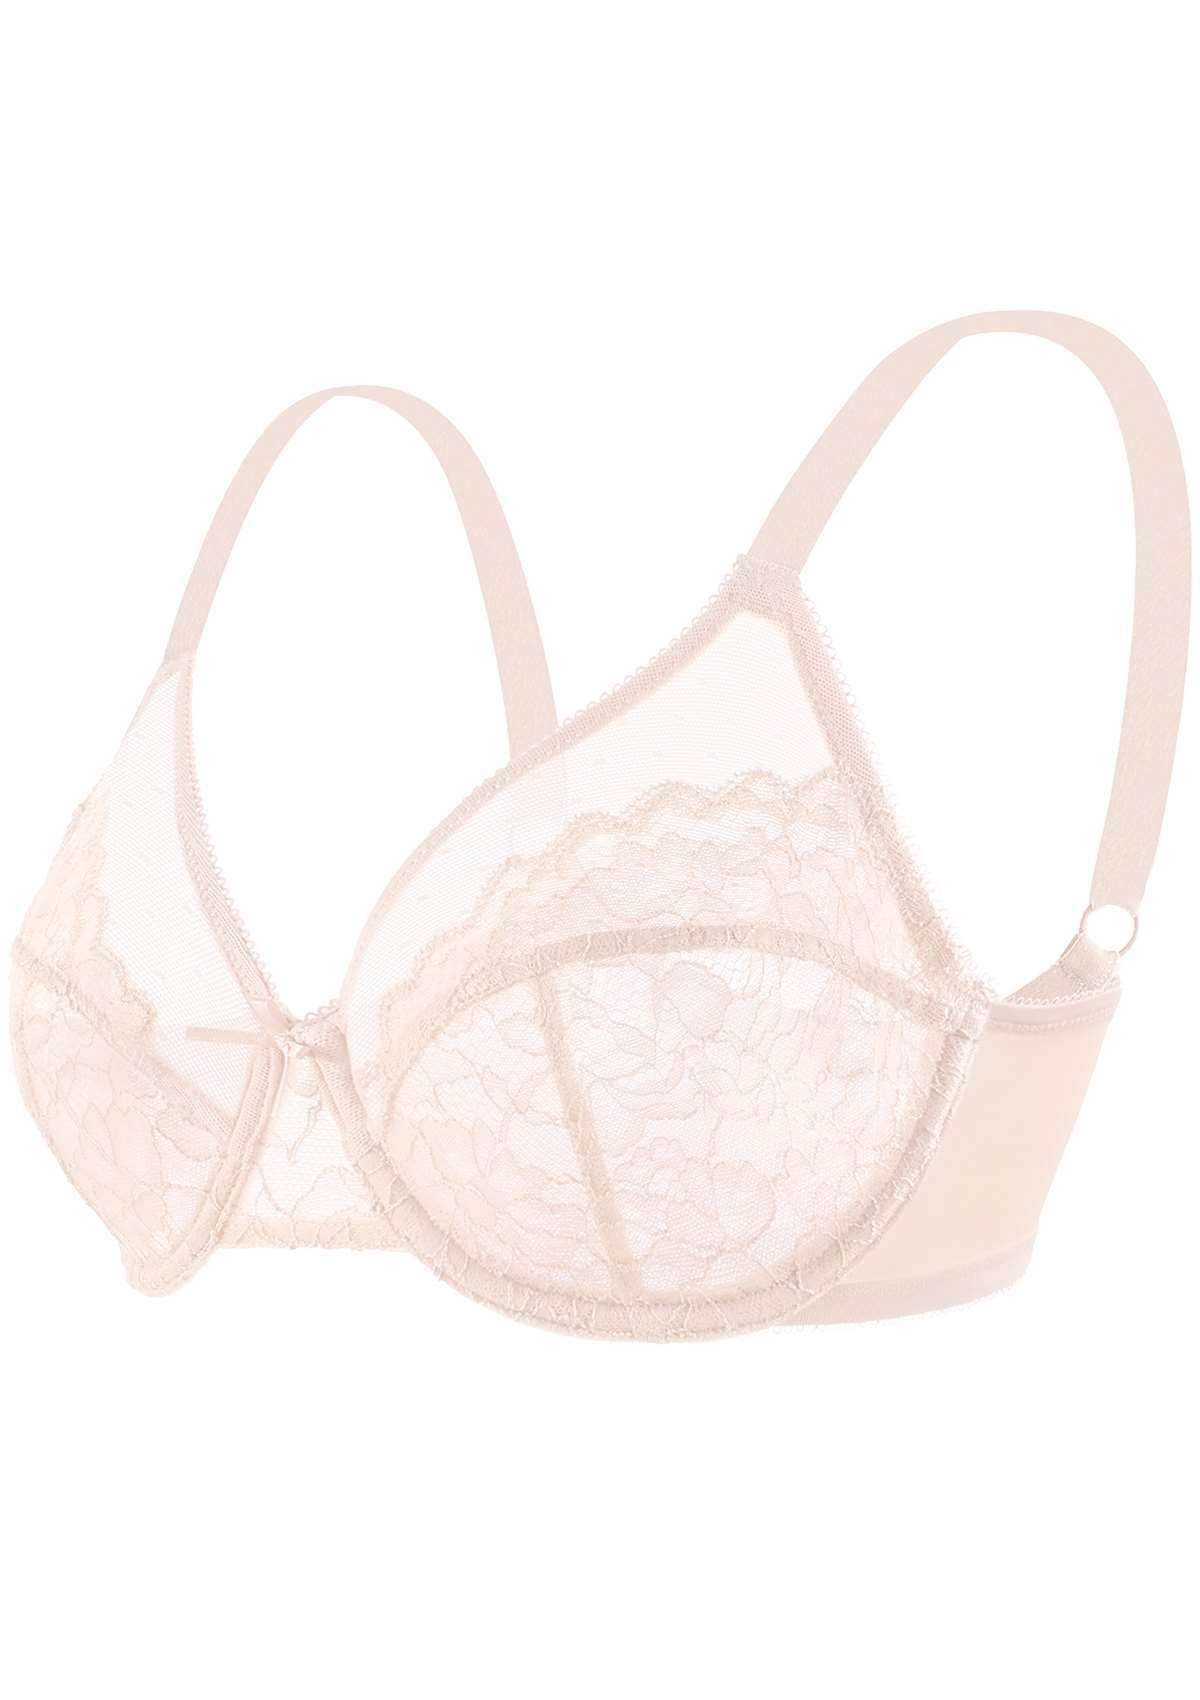 HSIA Enchante Lacy Bra: Comfy Sheer Lace Bra With Lift - Dusty Peach / 40 / G